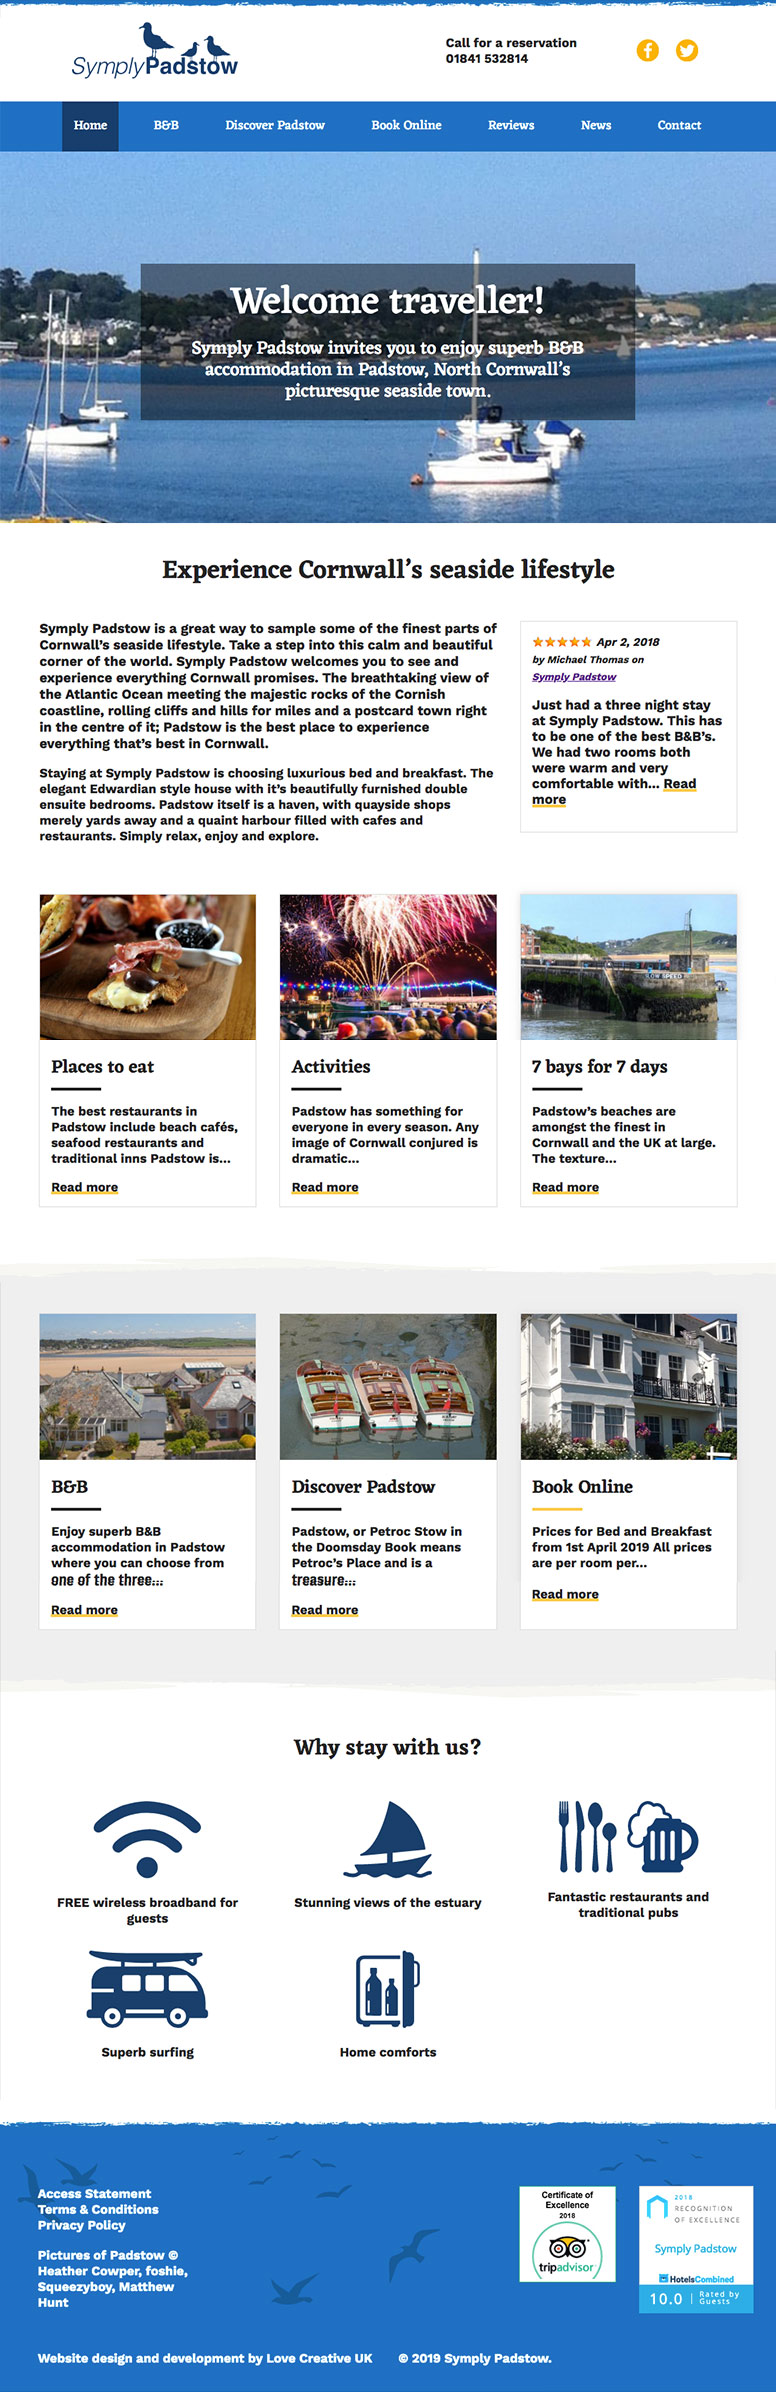 New WordPress website homepage for Symply Padstow